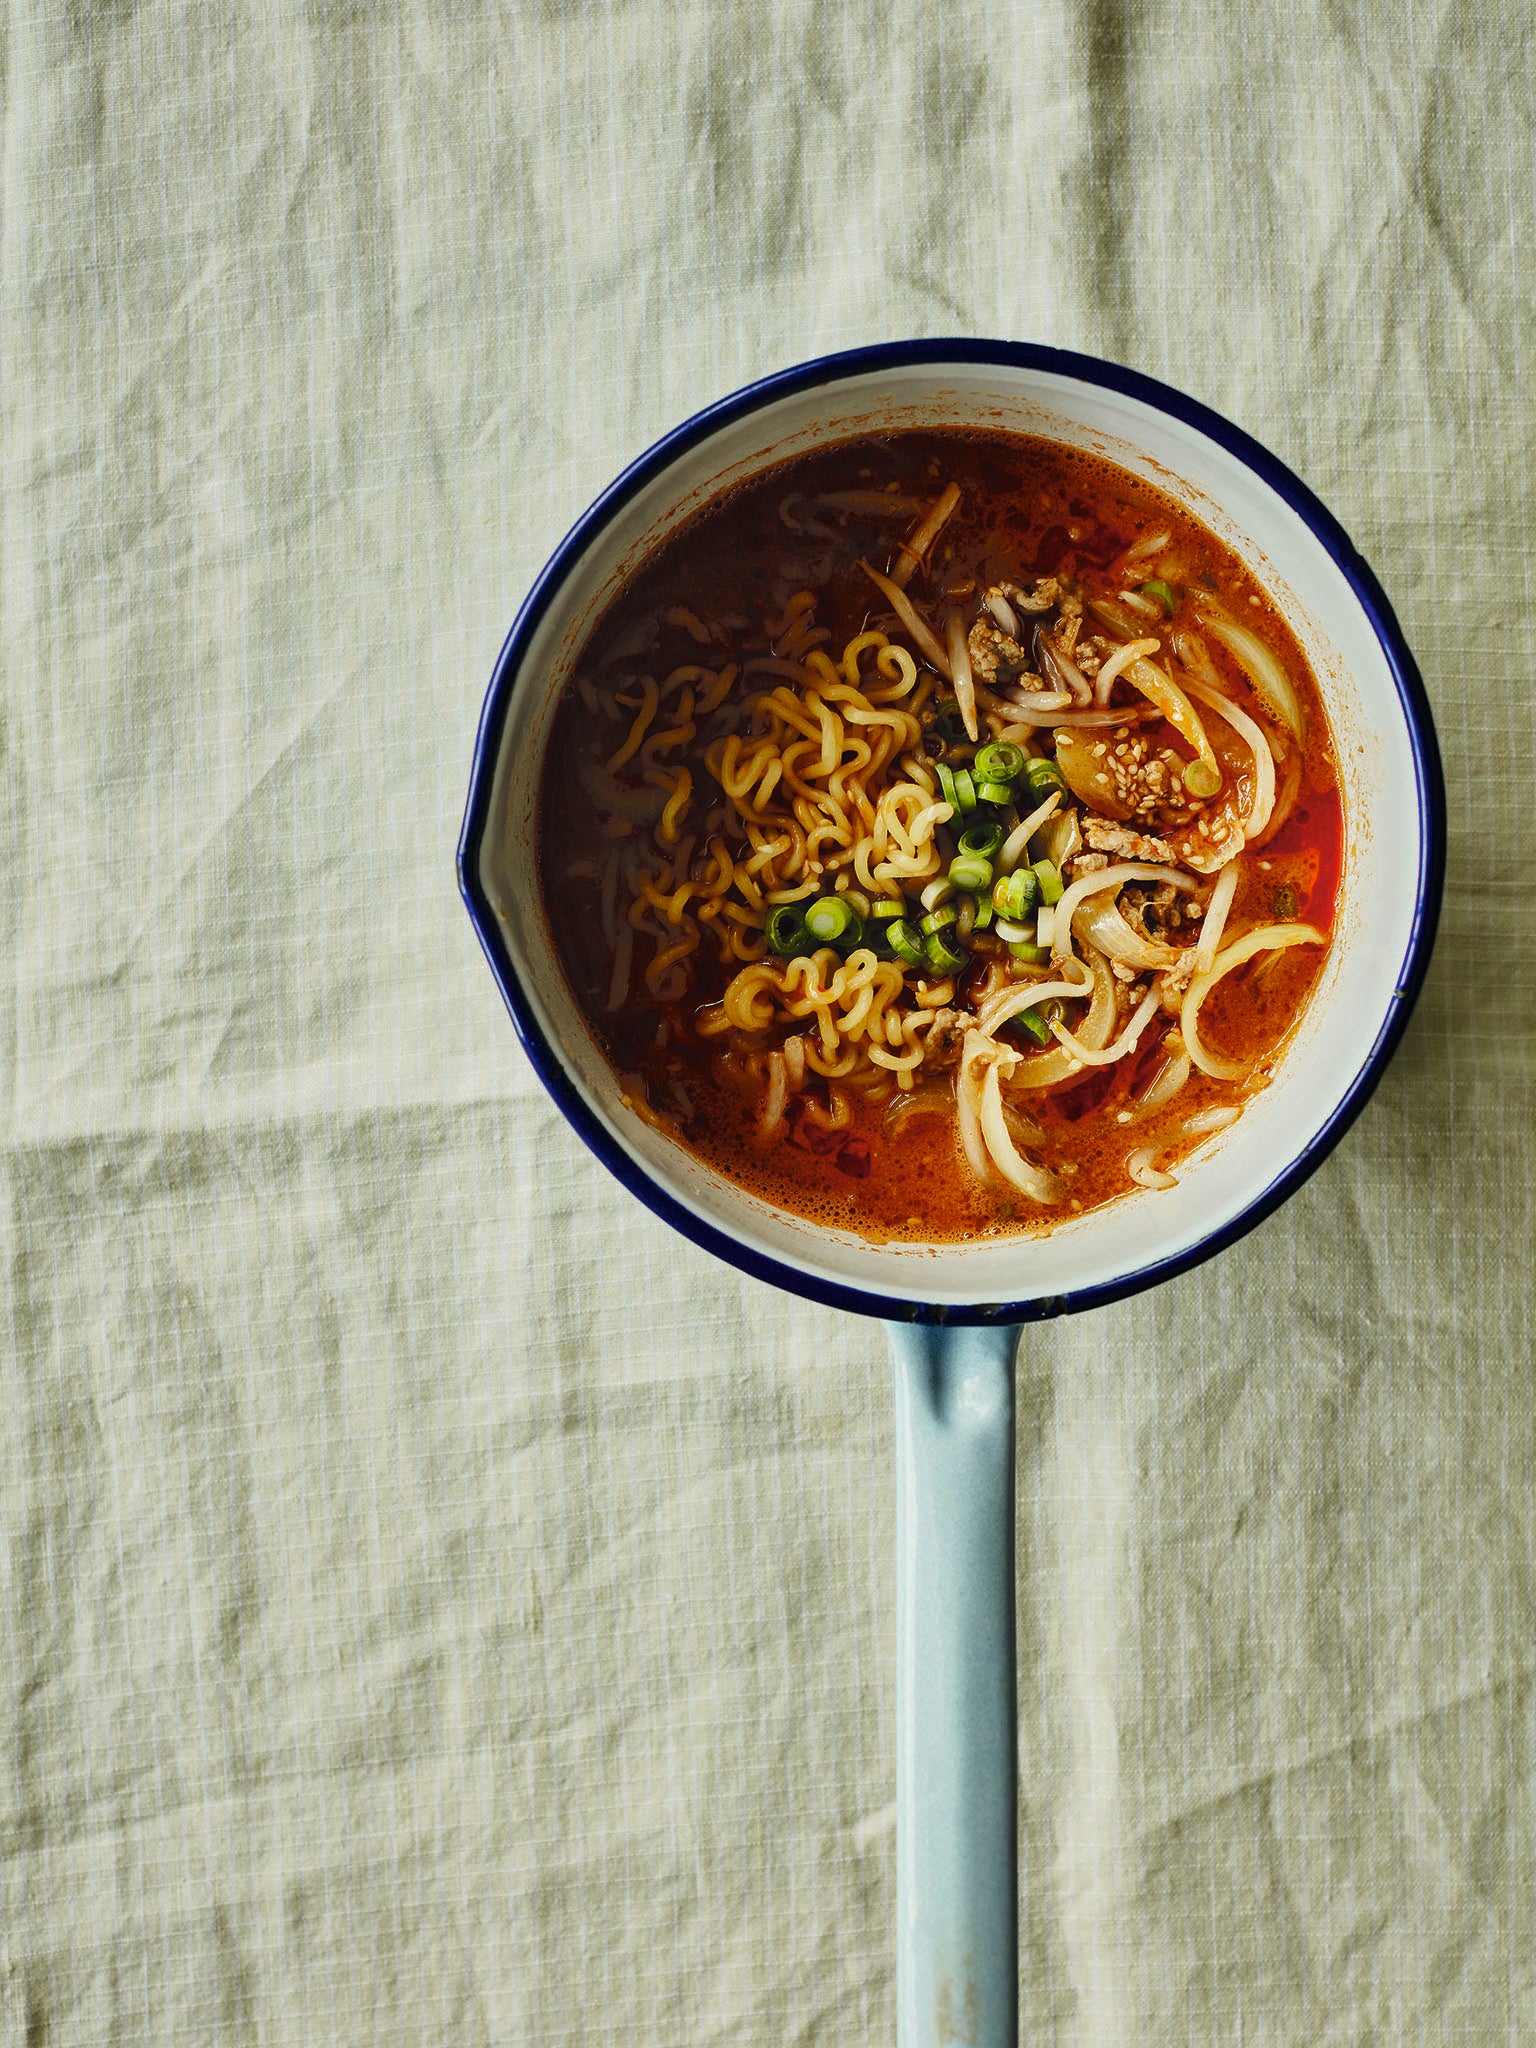 The perfect option when you need a quick noodle fix